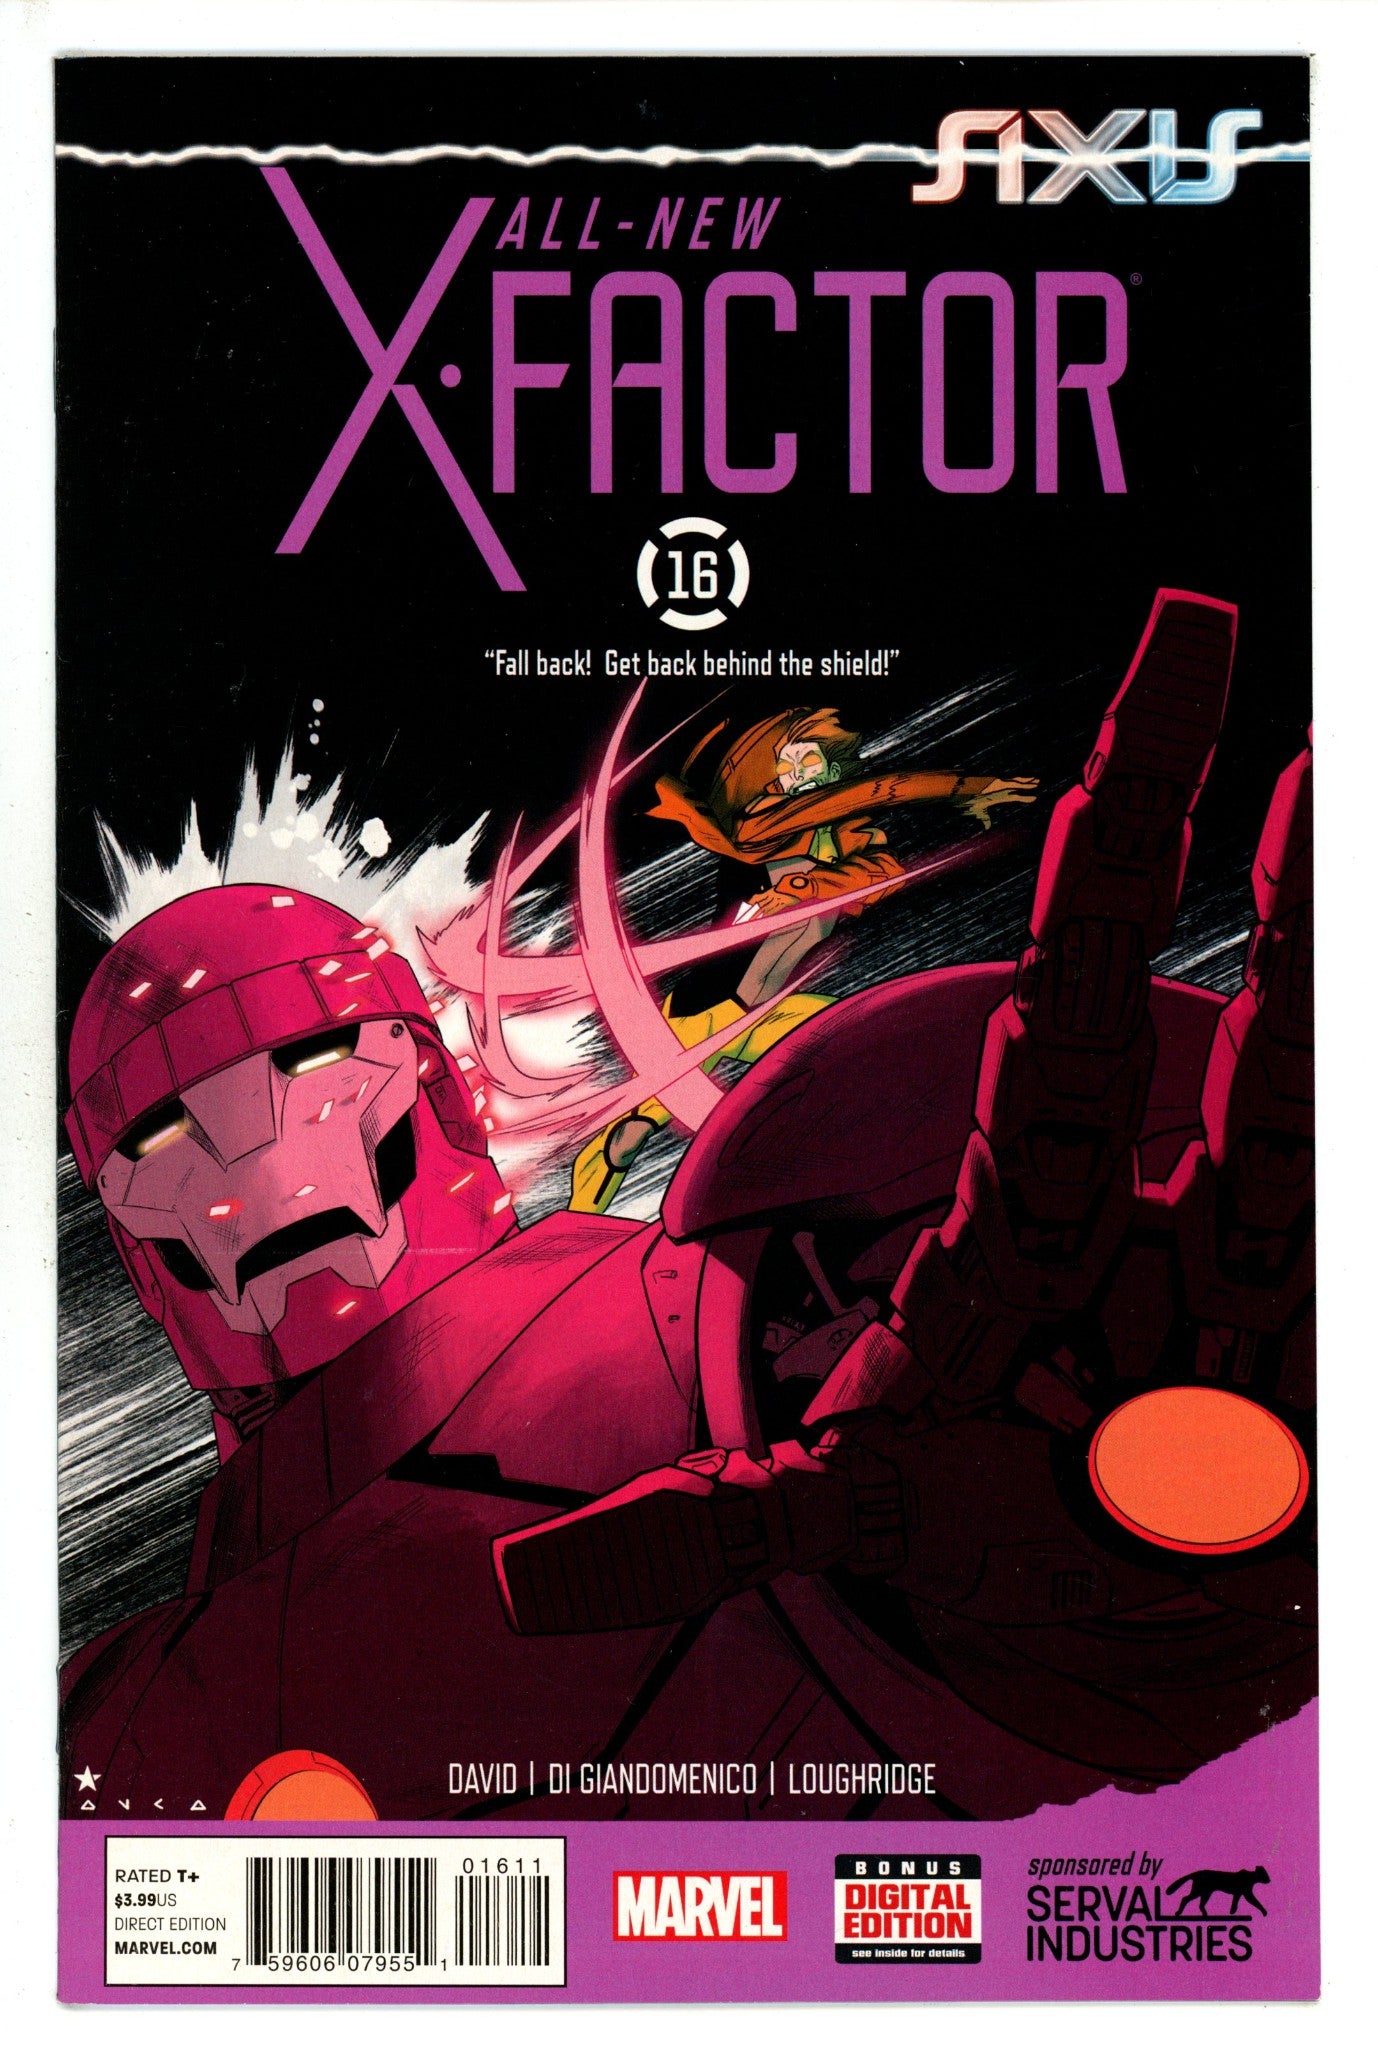 All-New X-Factor 16 (2014)